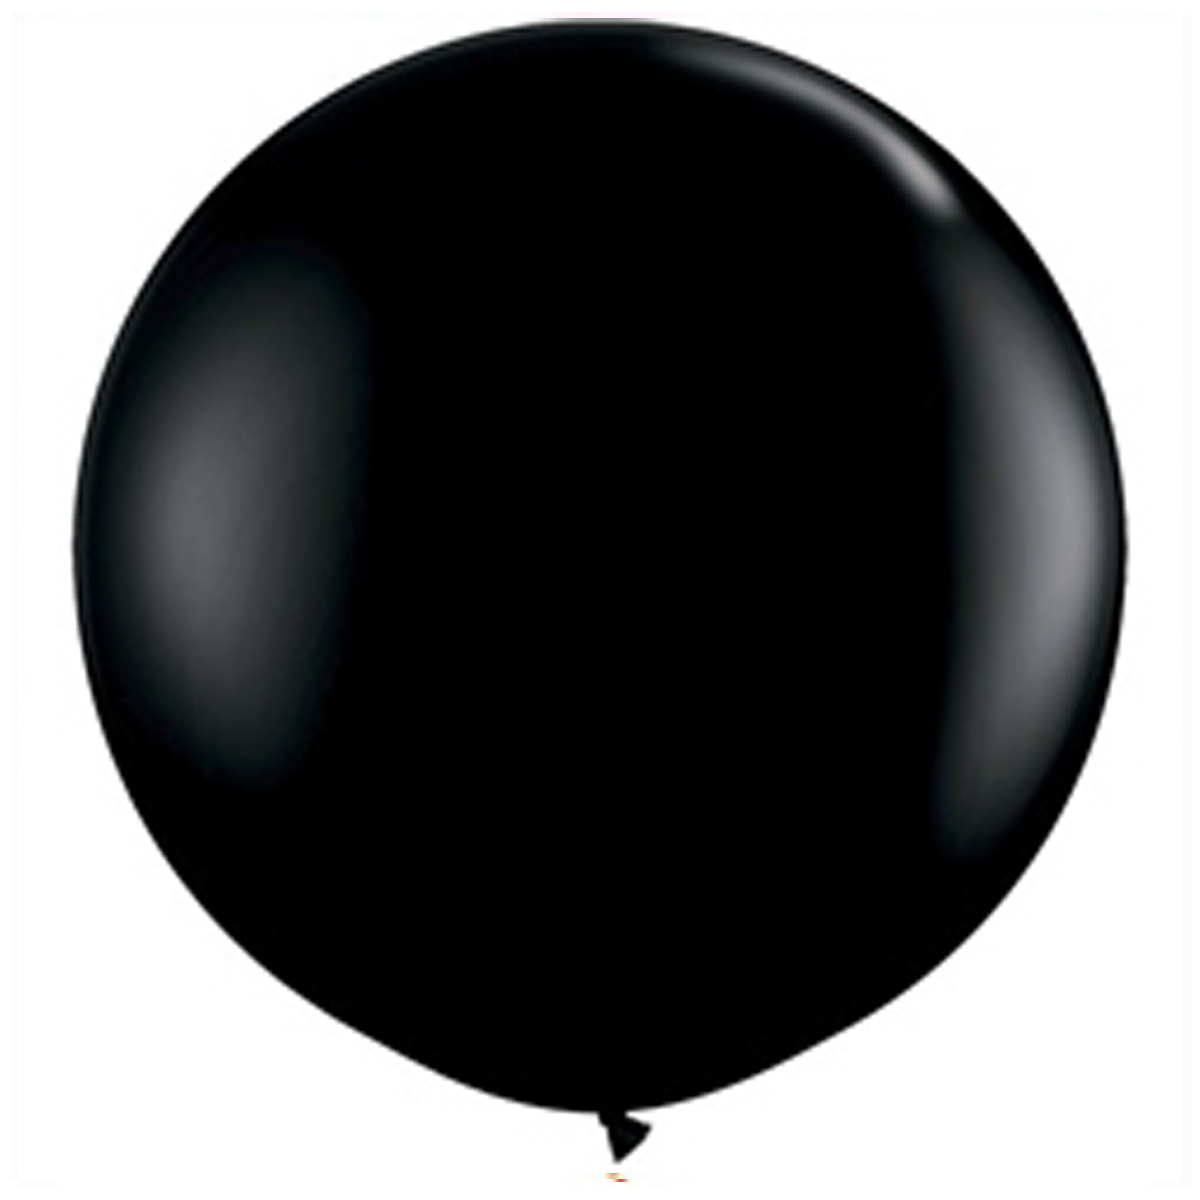 Five Baby Gender Reveal Confetti Balloon. 24" Black Balloons With Confetti.